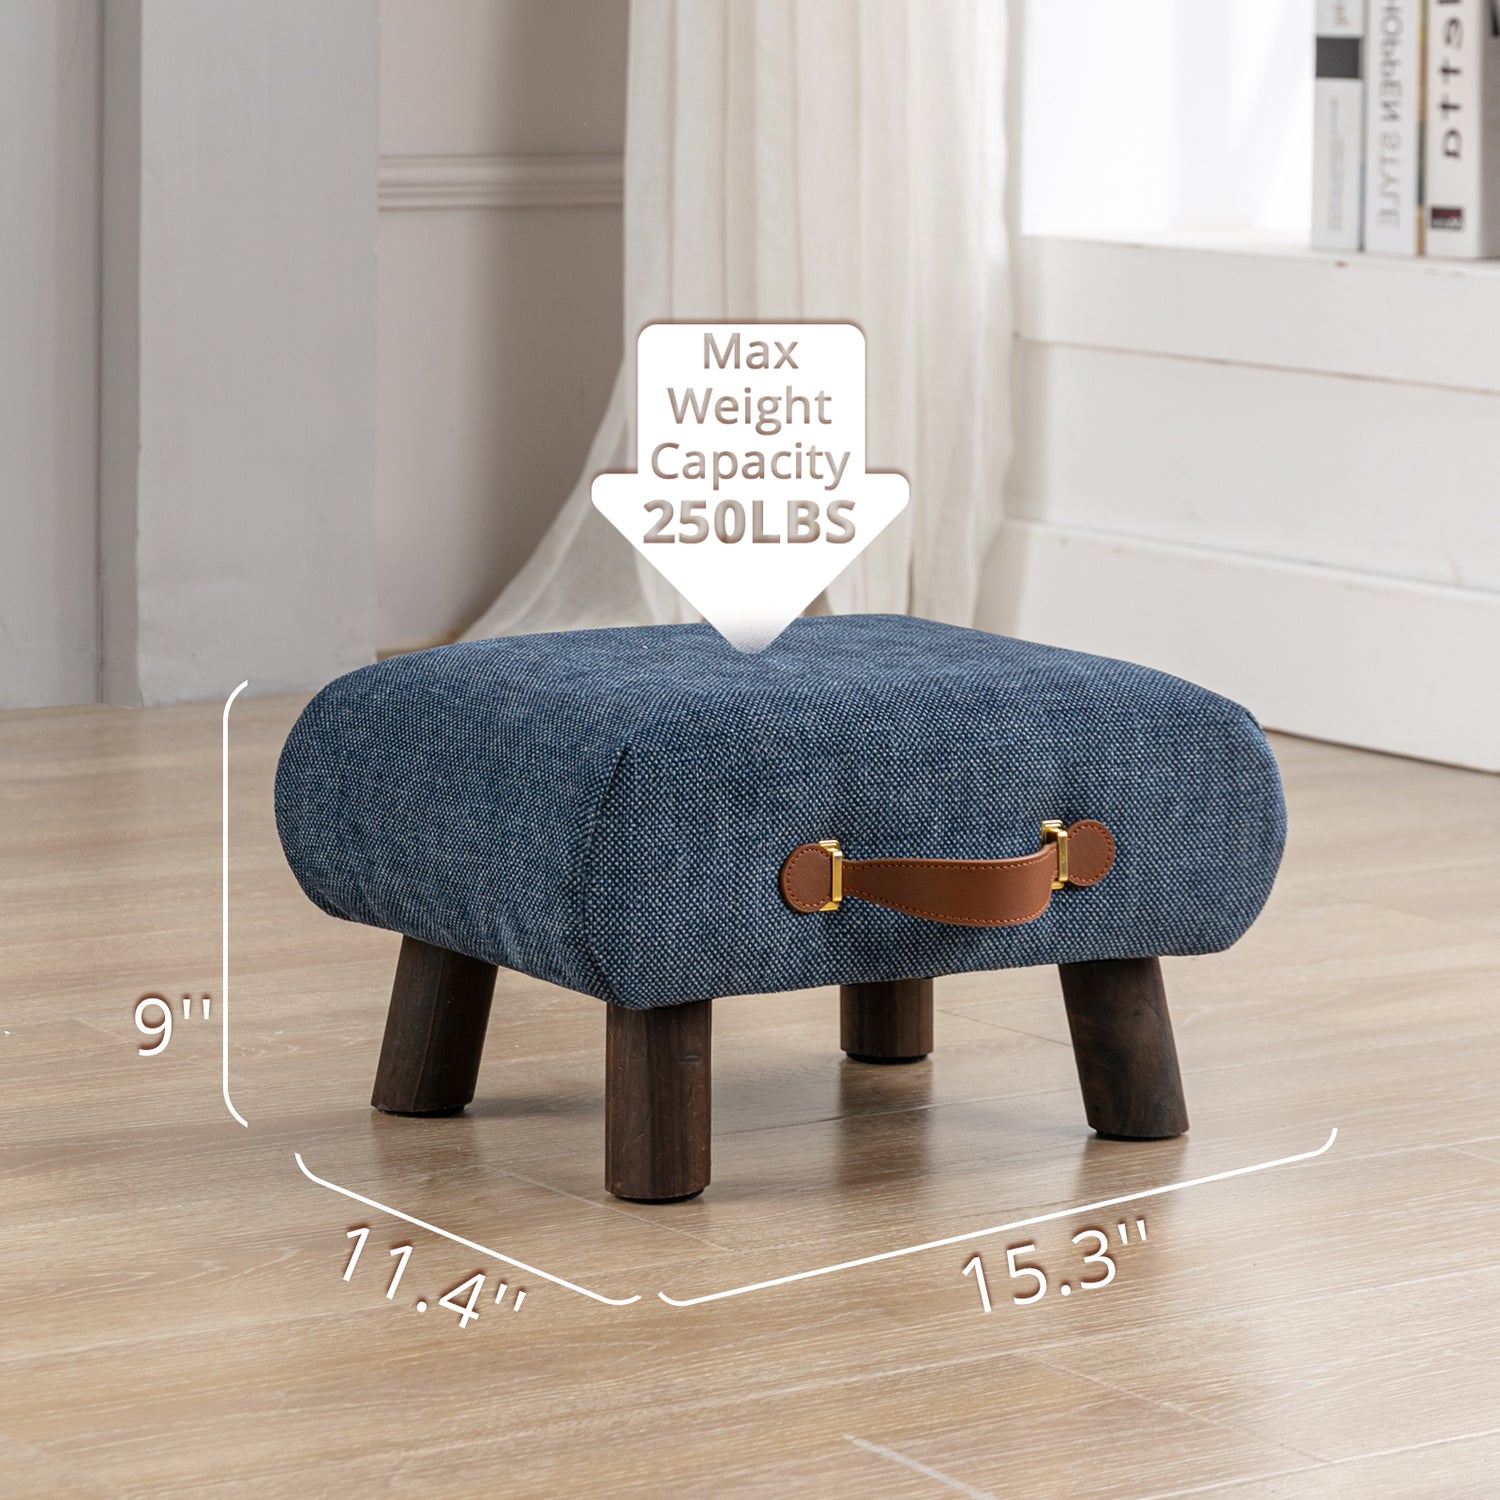 LUE BONA Small Curved Foot Stool with Handle, Beige Velvet Footstool and  Ottomans, Modern Foot Rest with Wooden Legs, Step Stool with Padded Seat  for Couch, Living Room, Welcome to consult 